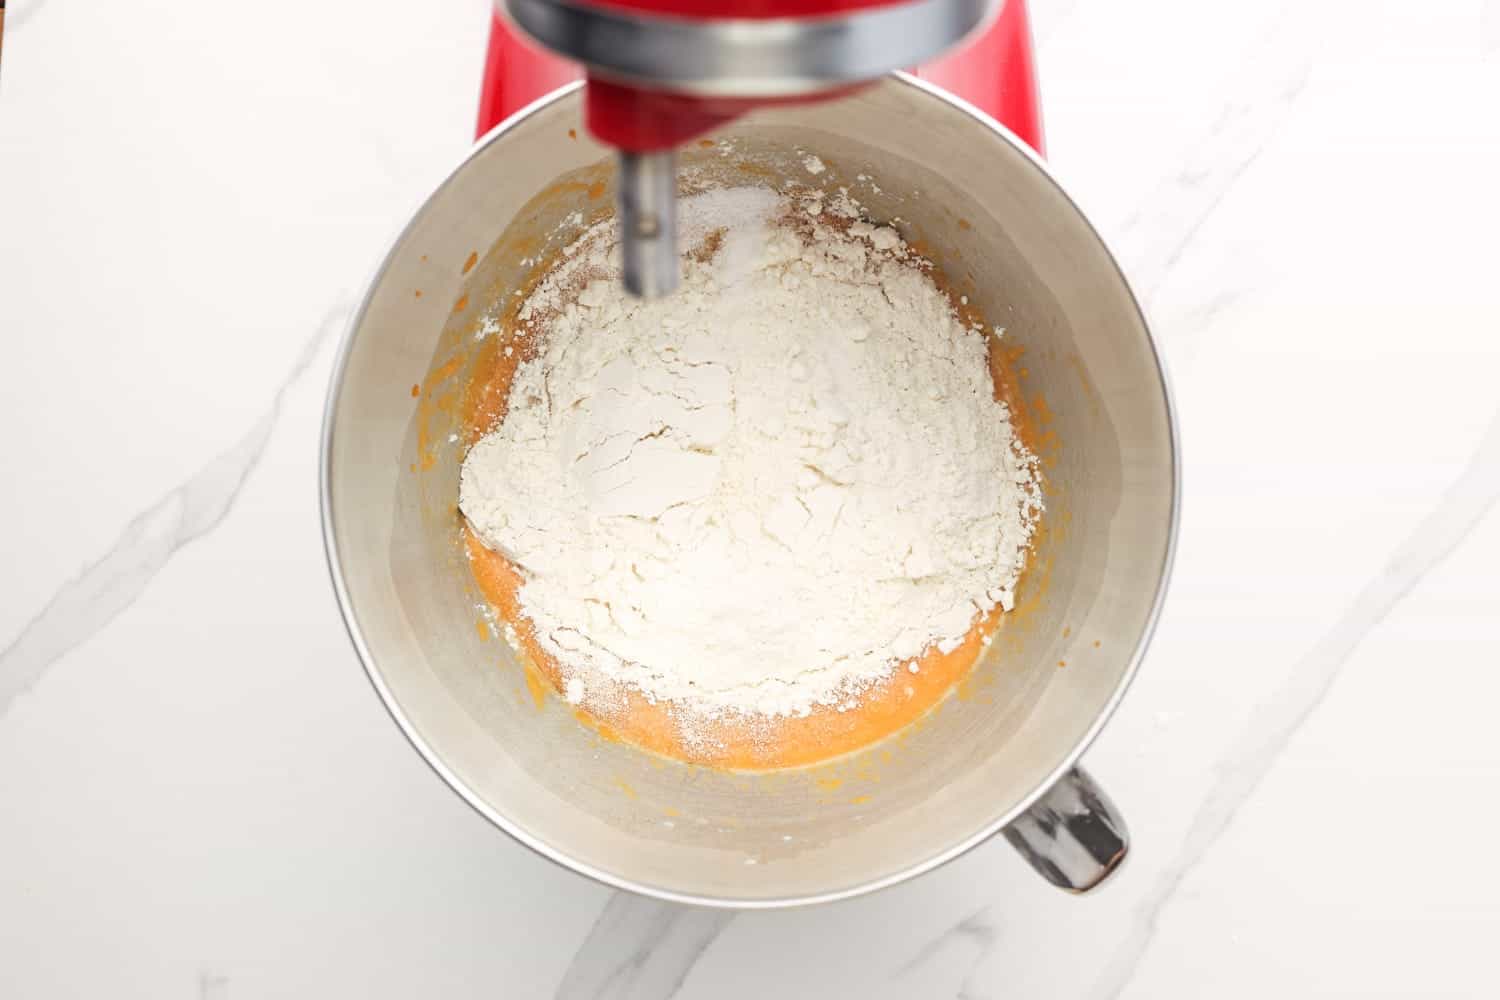 Flour and yeast added to a mixer.